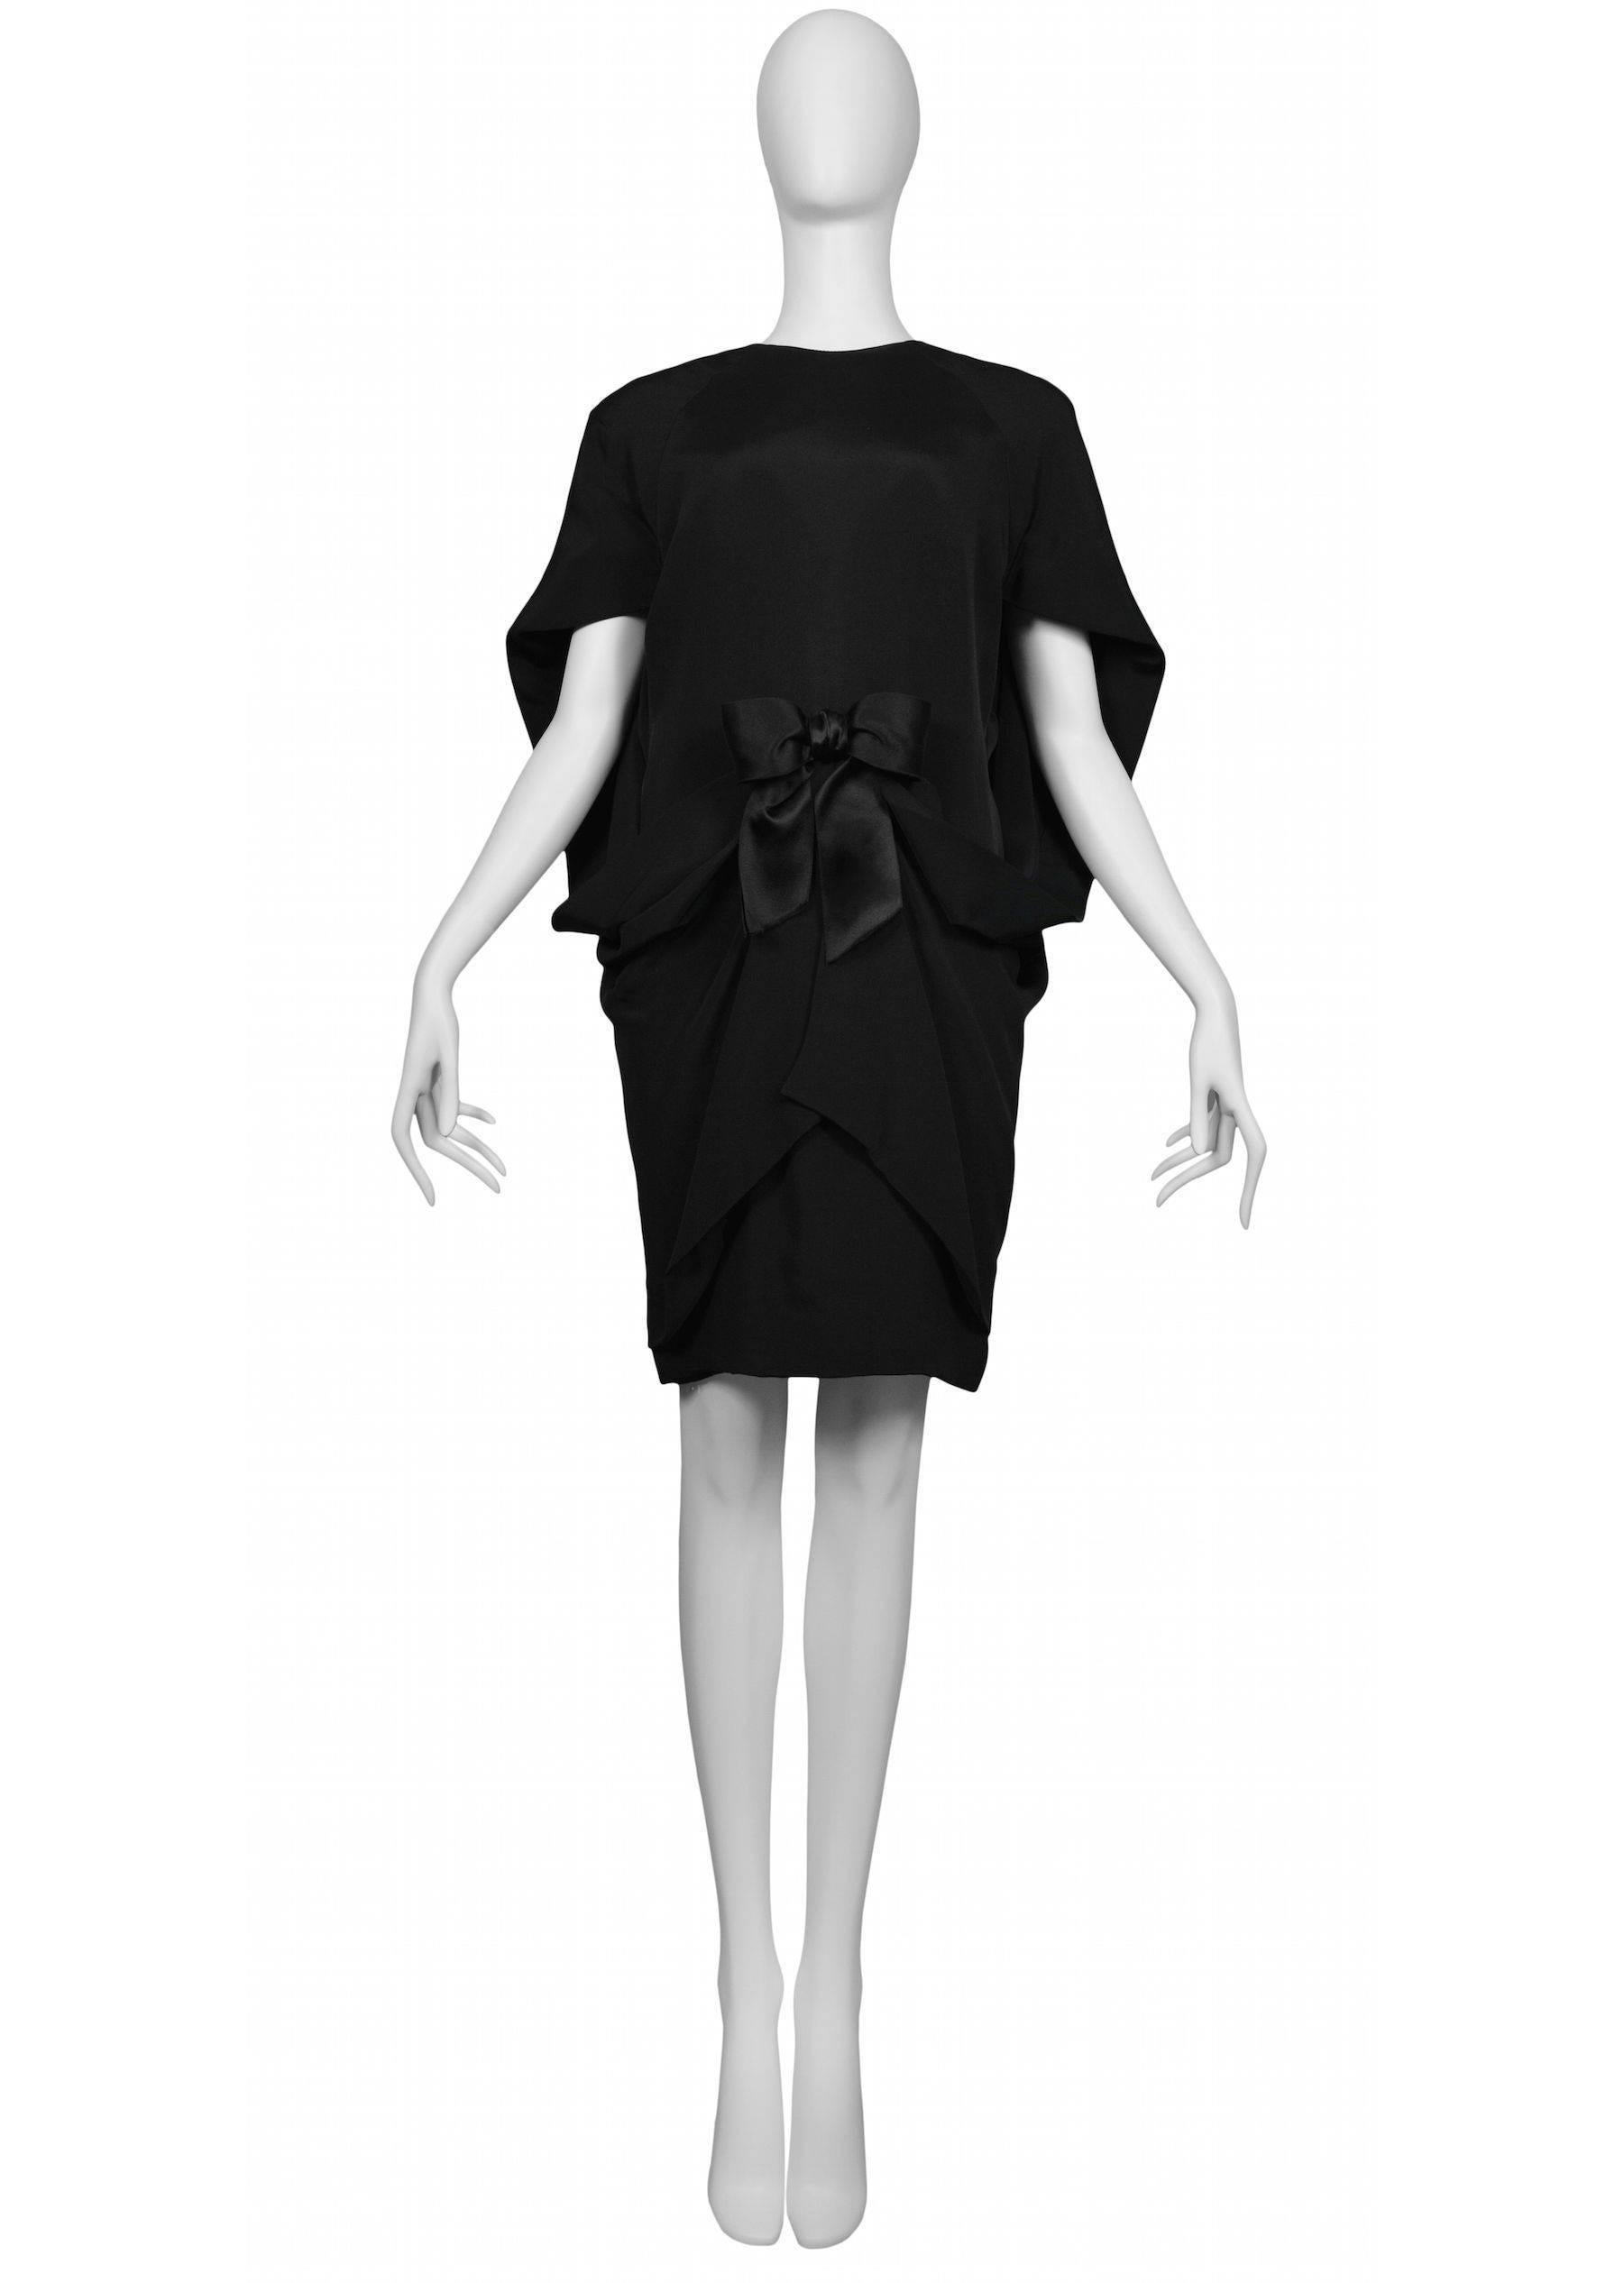 Pierre Cardin Couture variation of the 